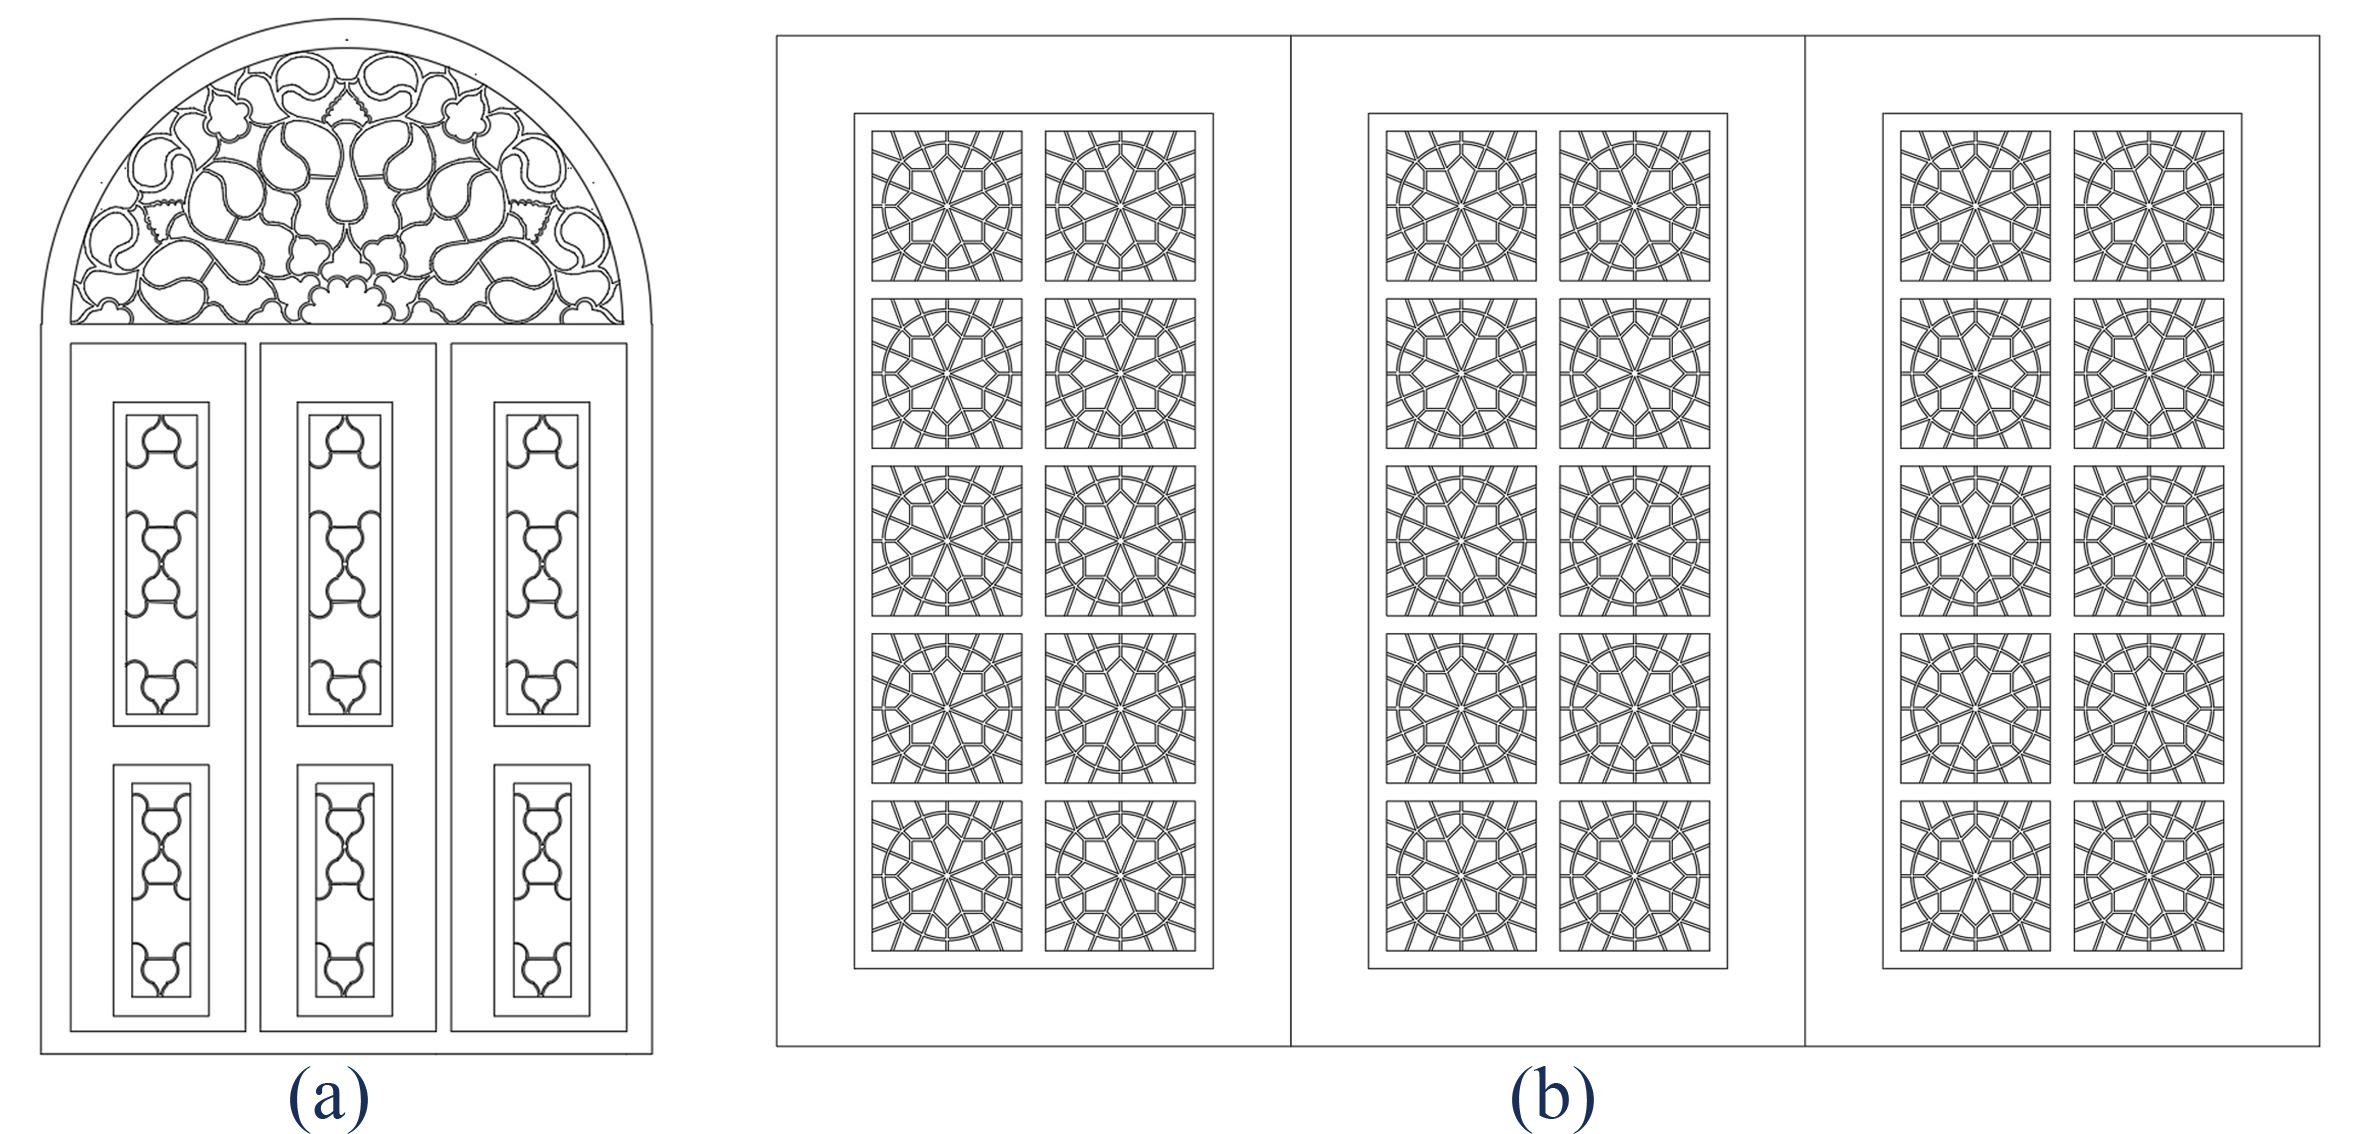 General division of patterns: (a) floral pattern and (b) geometrical patterns.